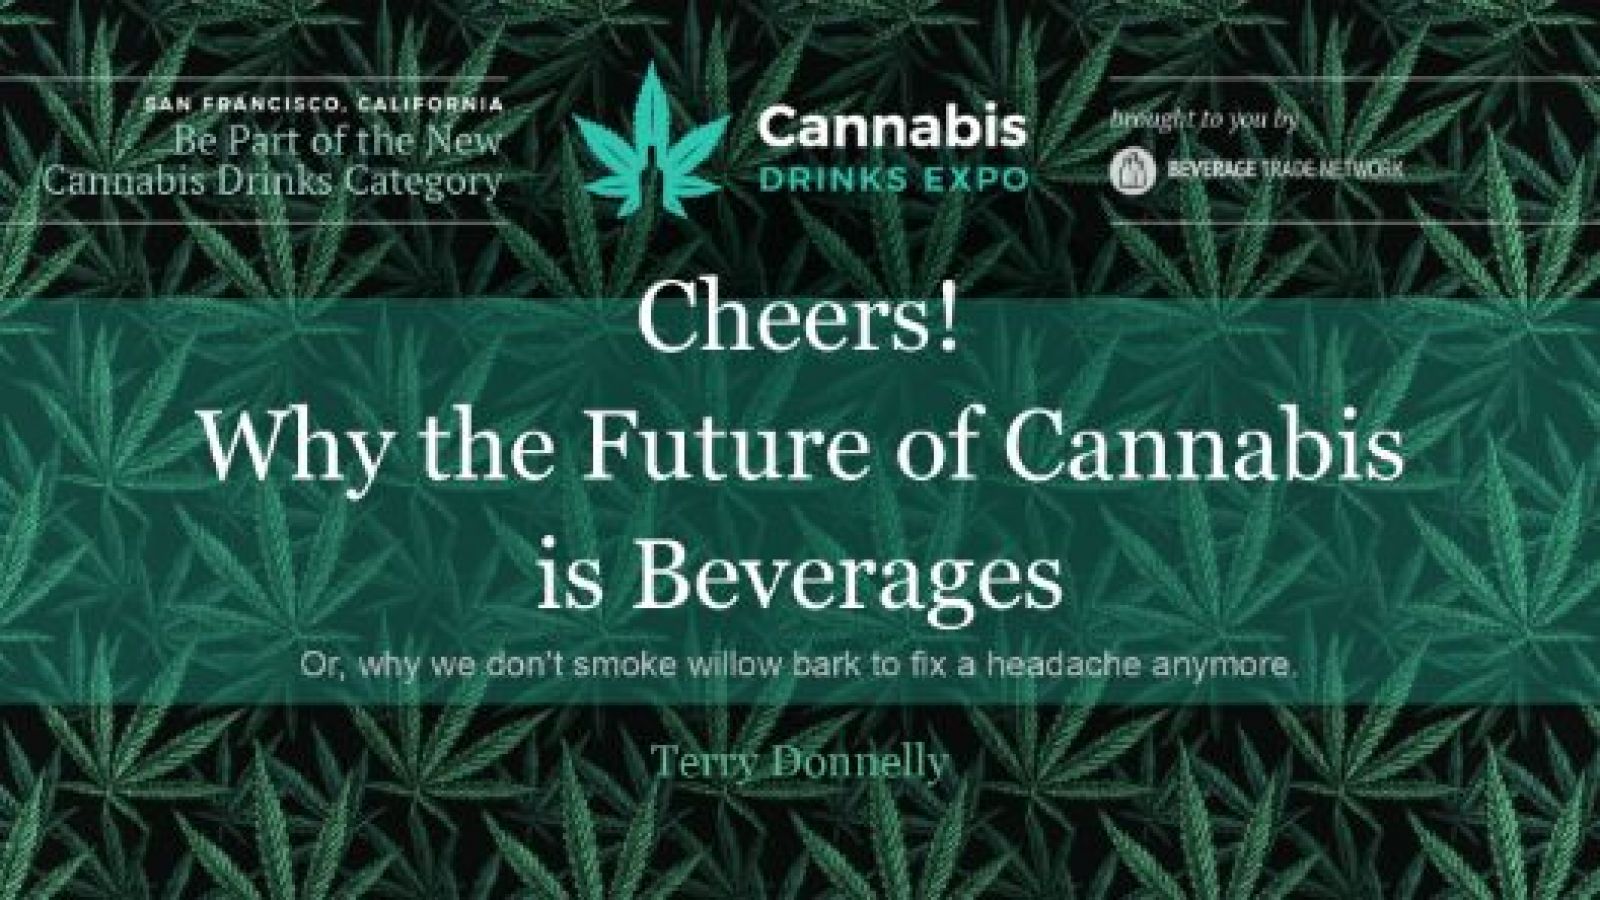 Photo for: Why the future of Cannabis is Beverage by Terry Donnelly